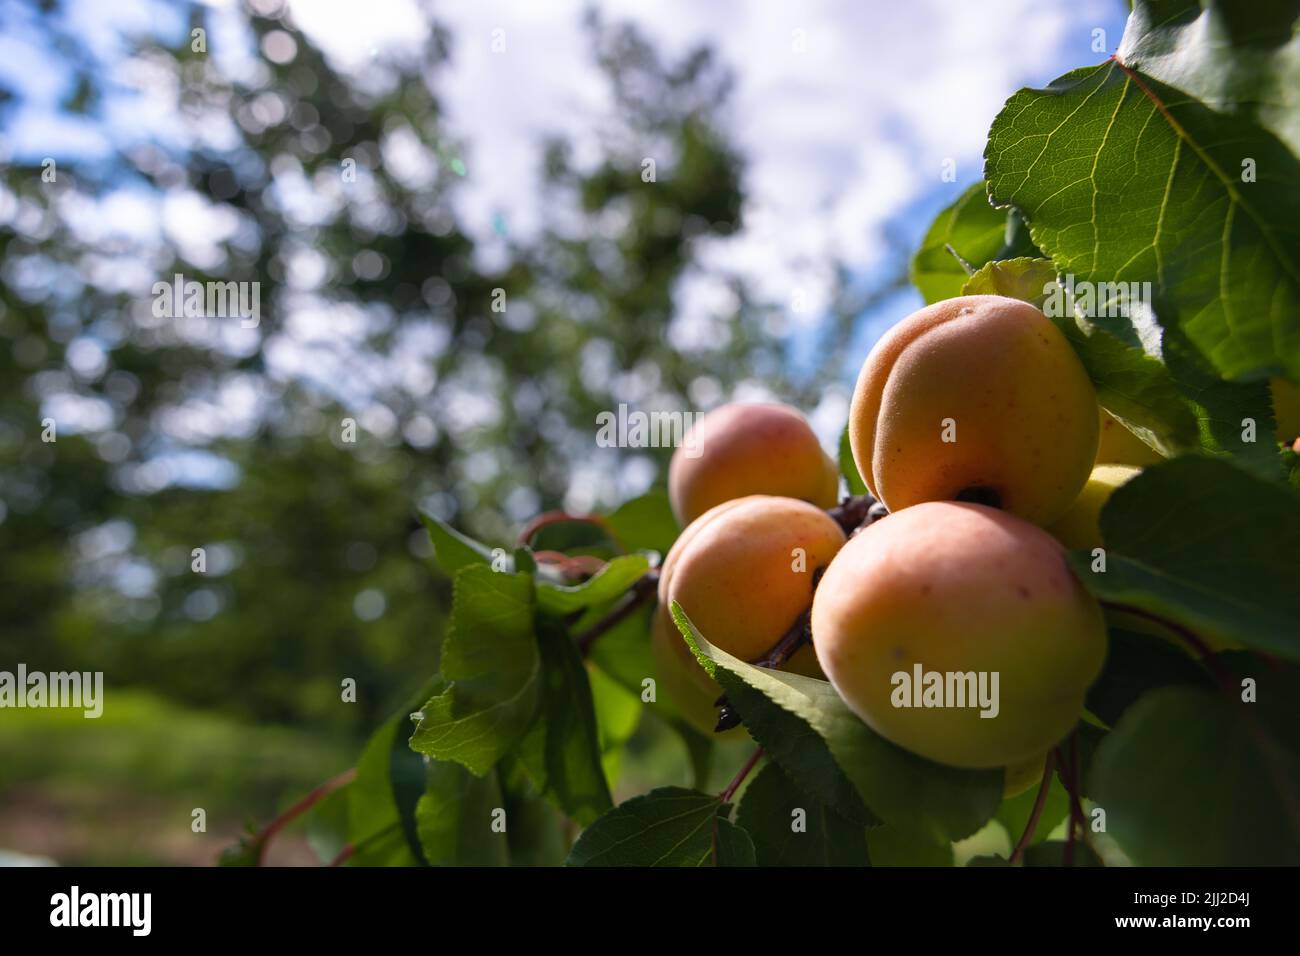 Apricots on the tree. Orchard or fruit farming background photo. Healthy raw fruit or vegan food production. Apricot production in Malatya. Stock Photo